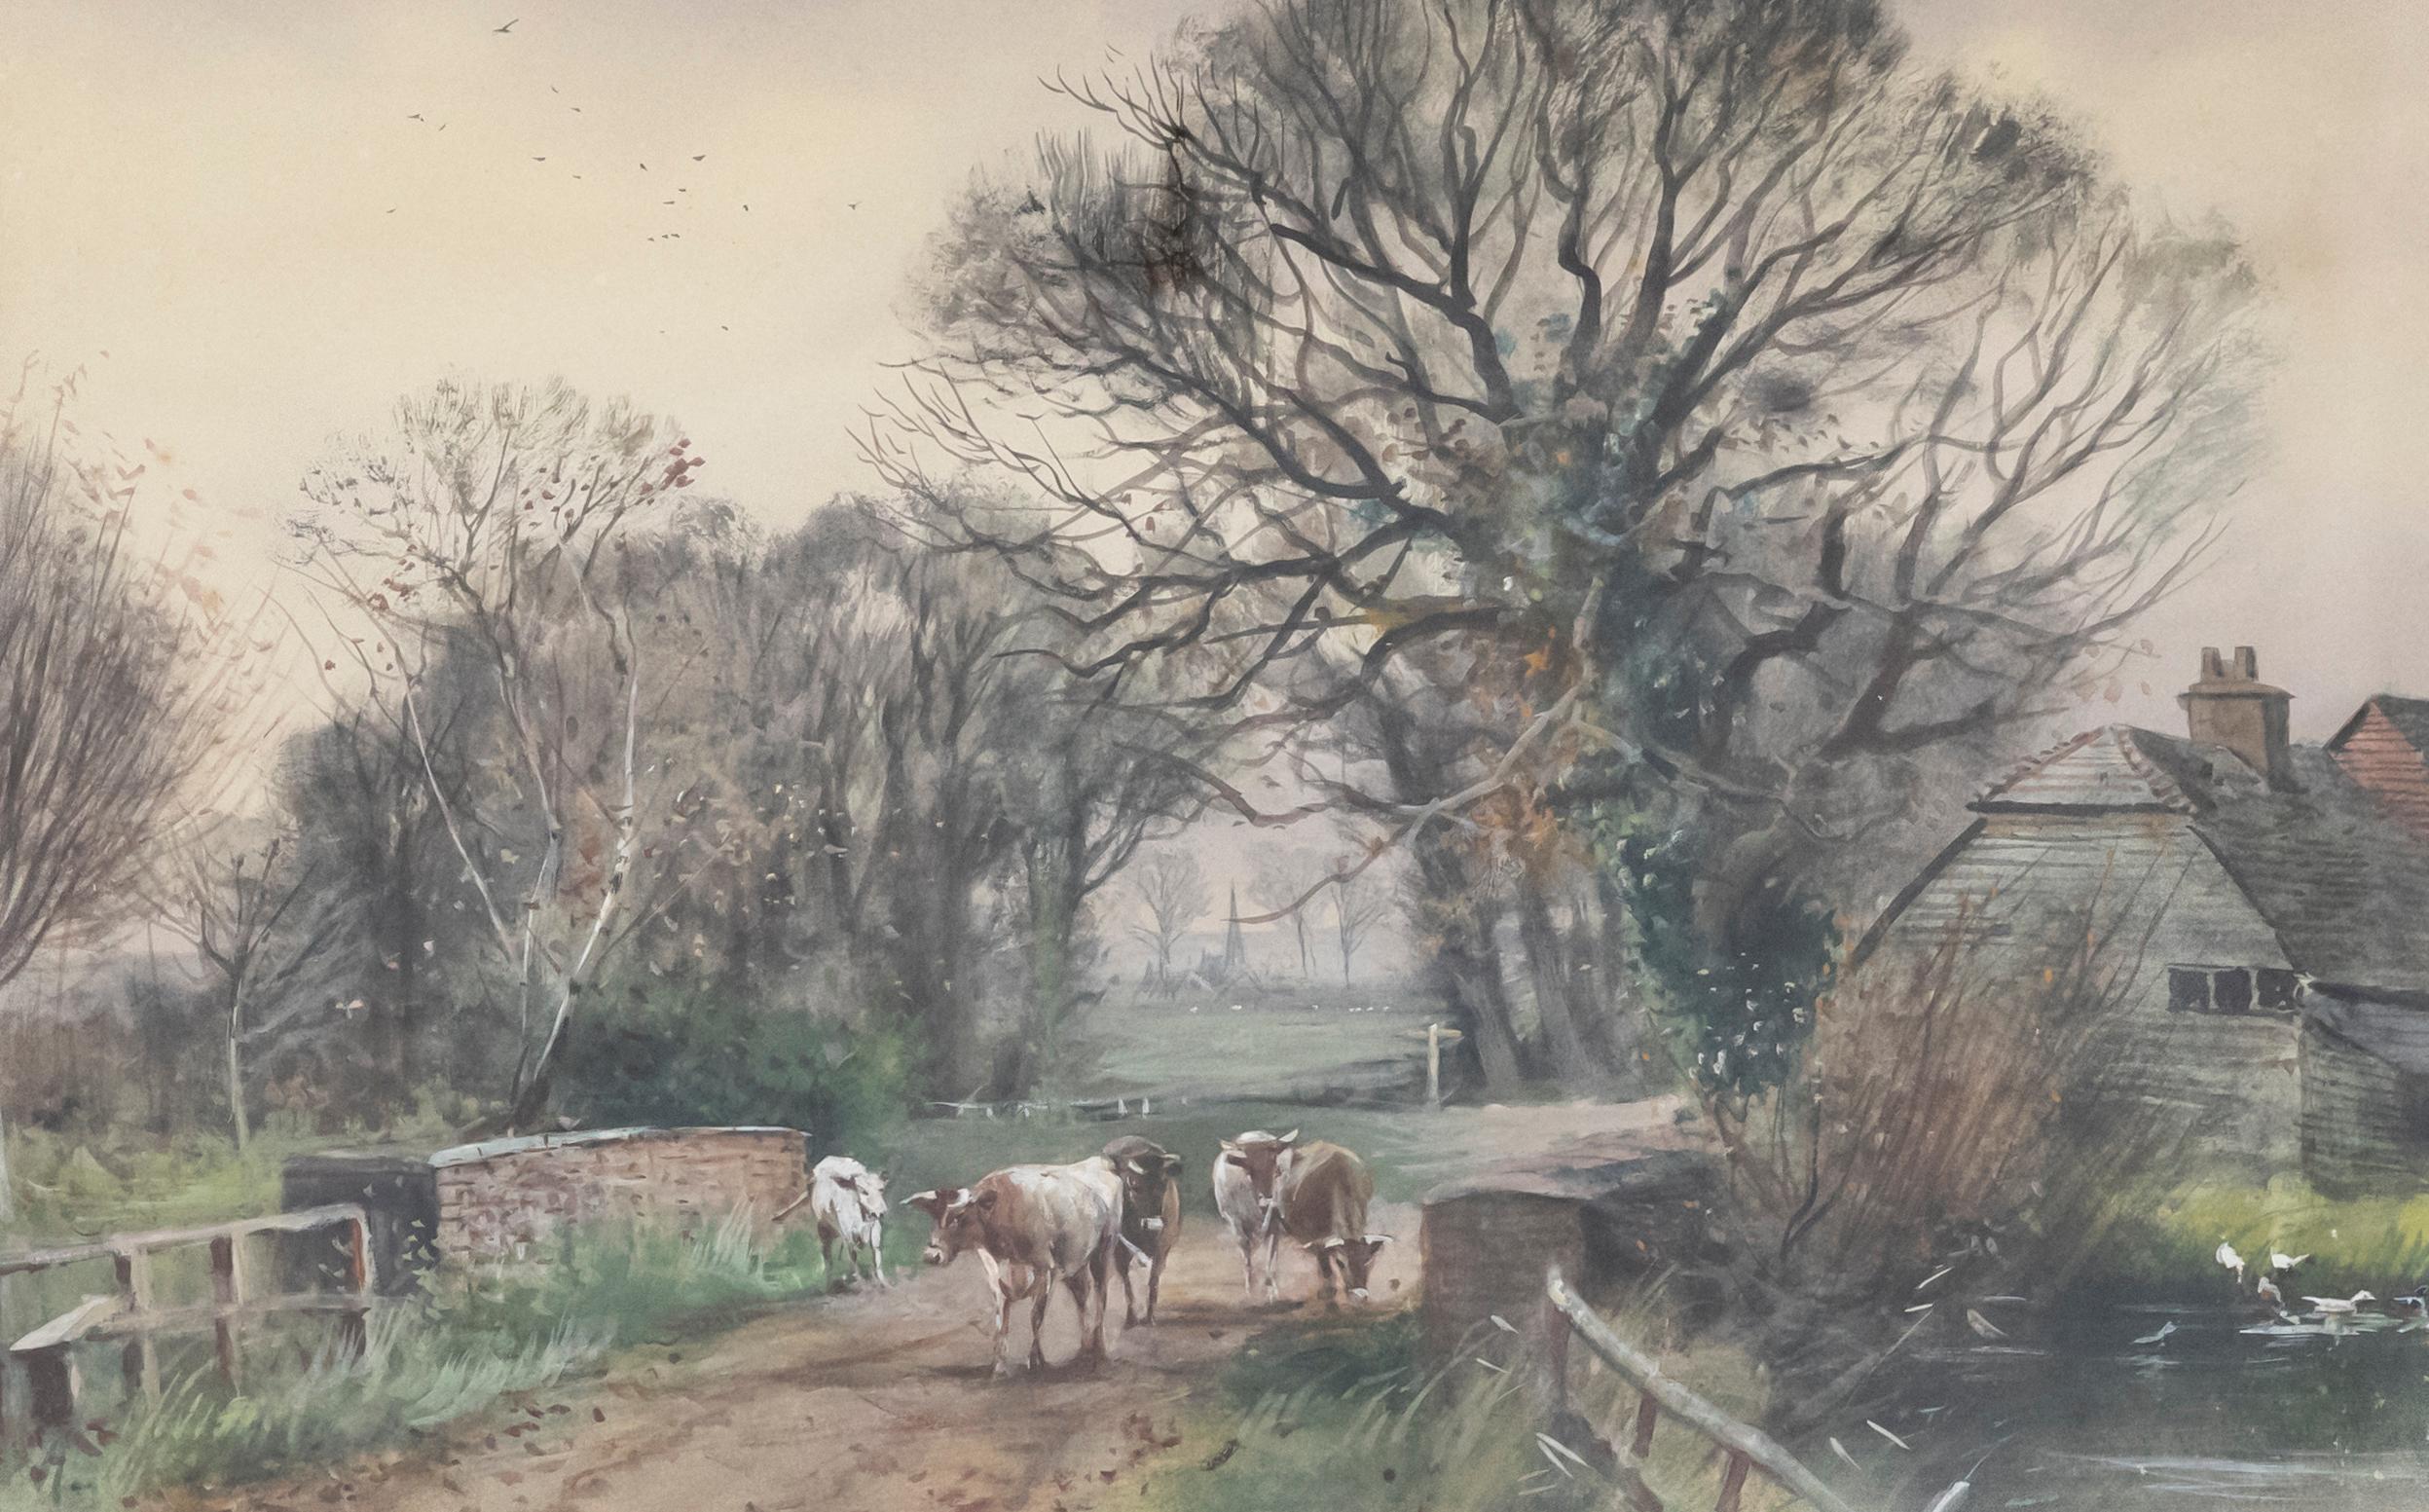 Framed 20th Century Watercolour - Cattle Over the Brick Bridge - Art by Unknown